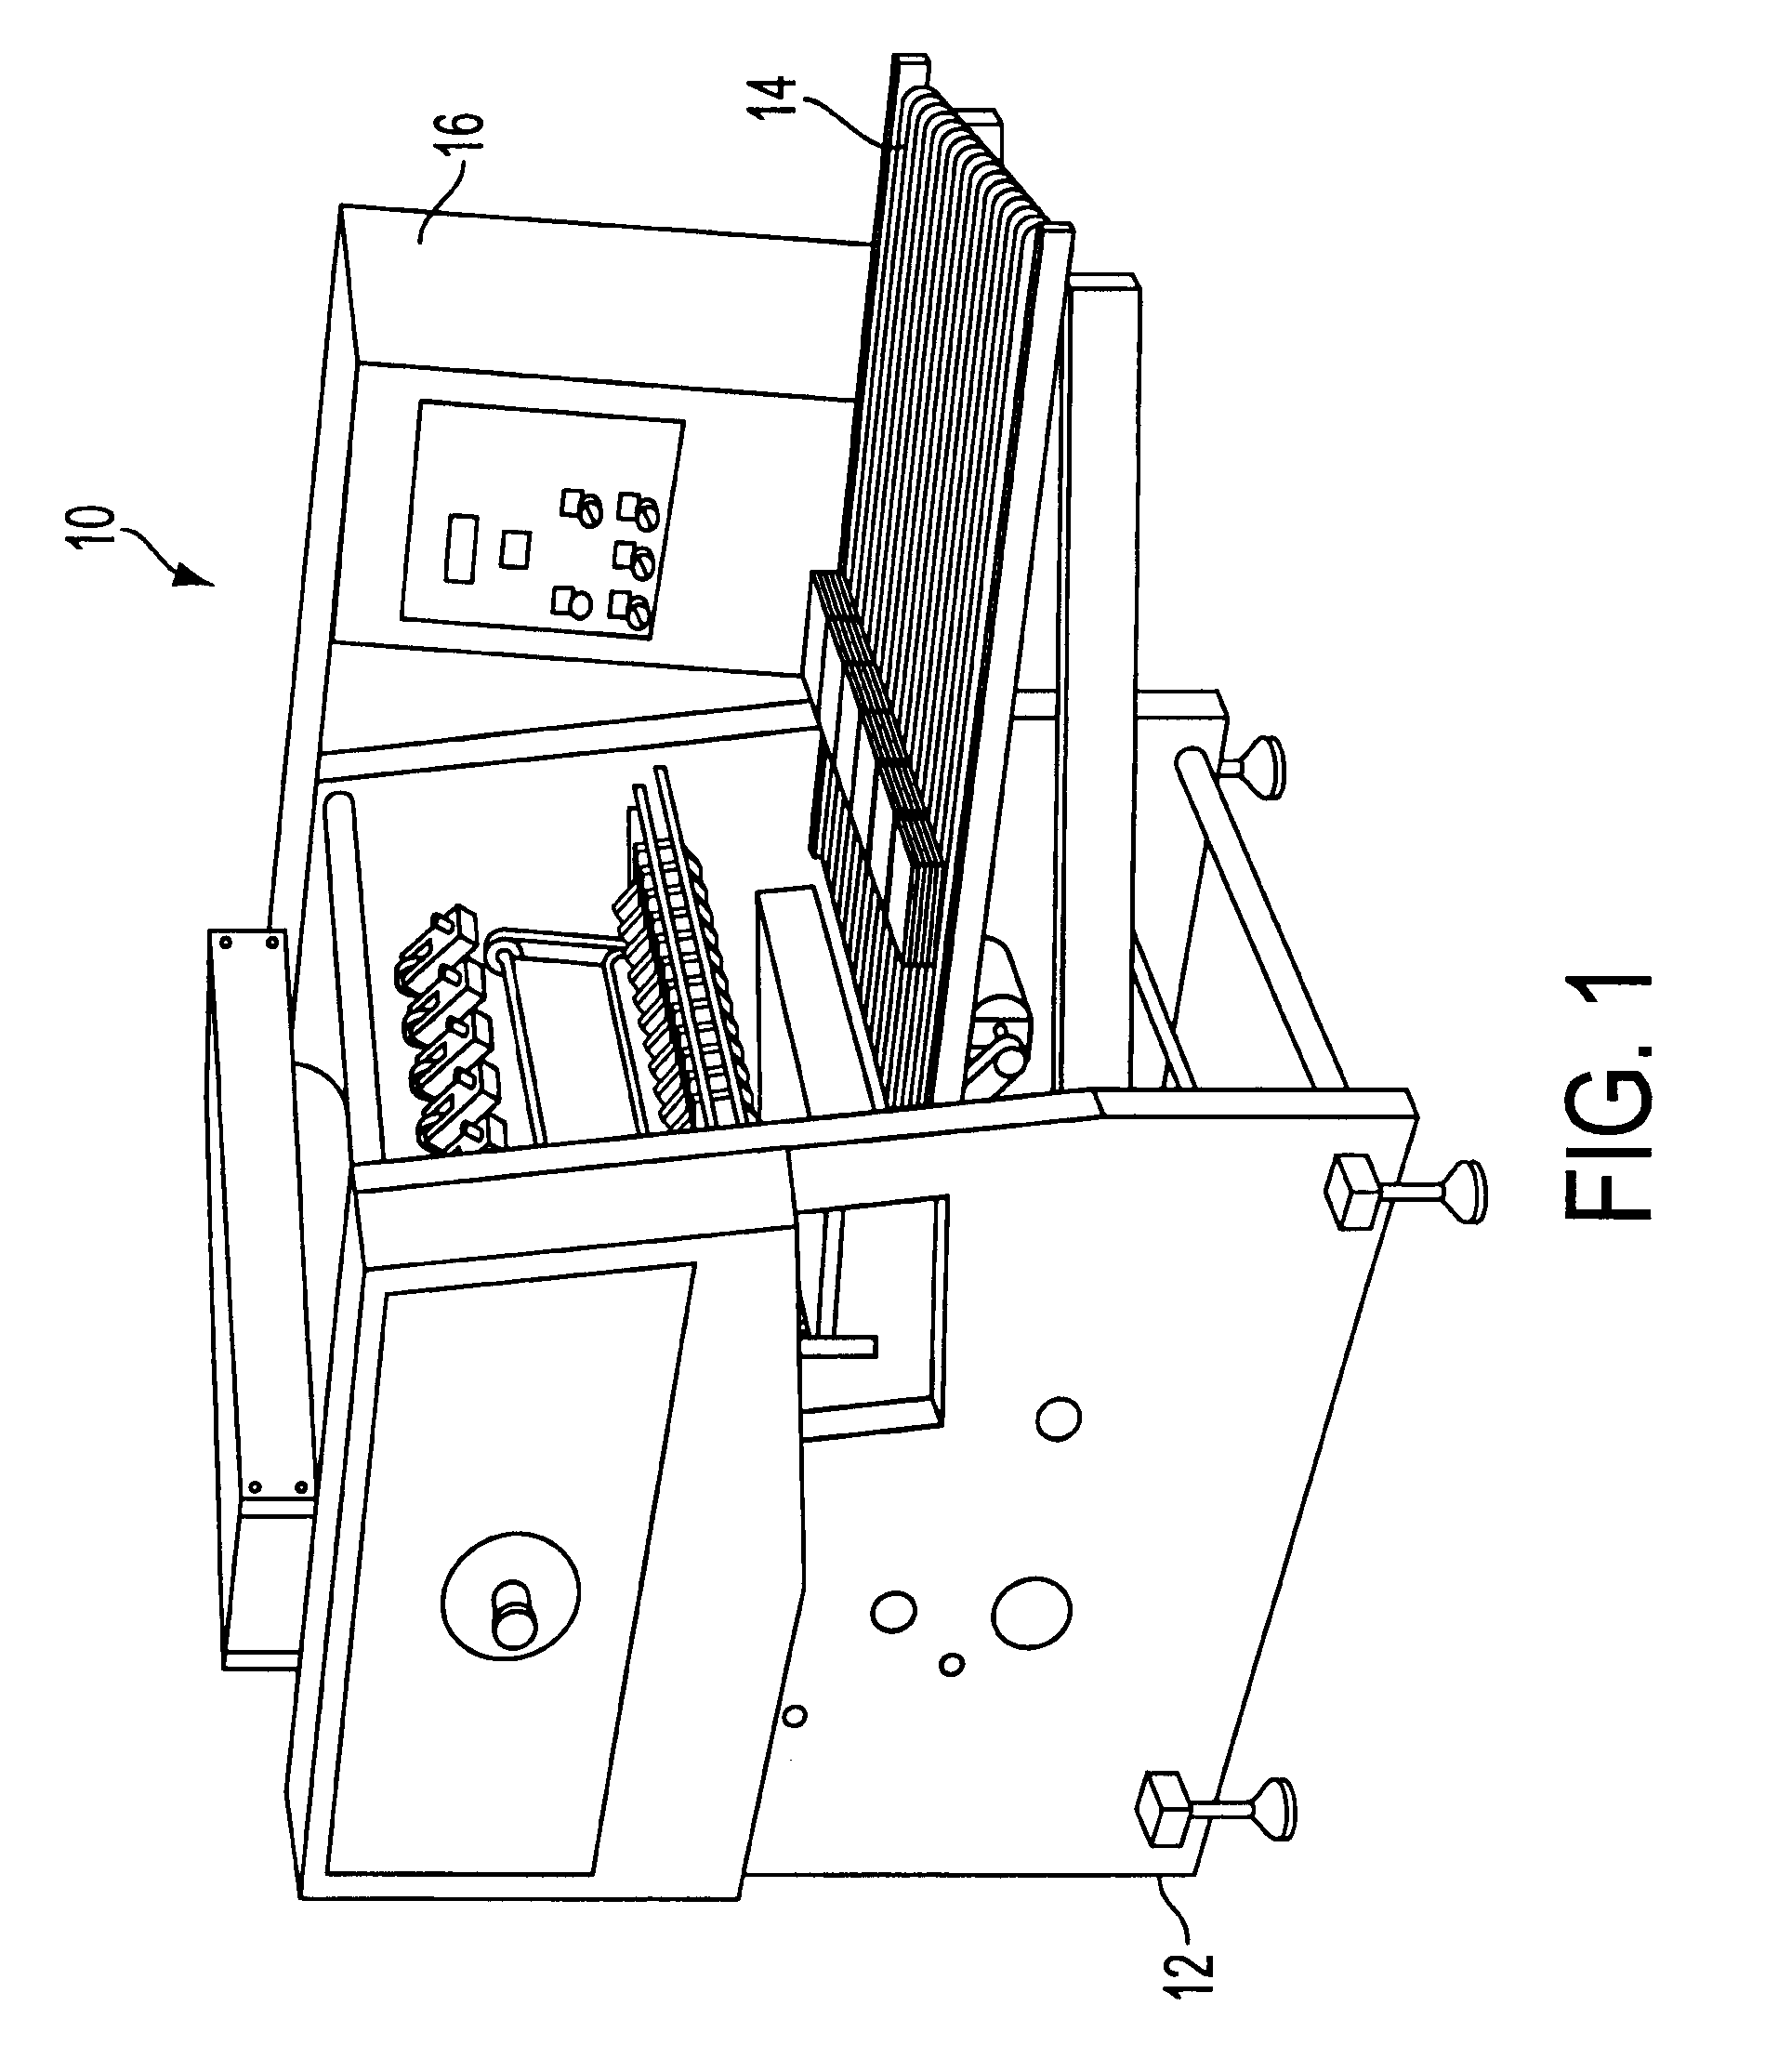 Apparatus for cutting and stacking a multi-form web